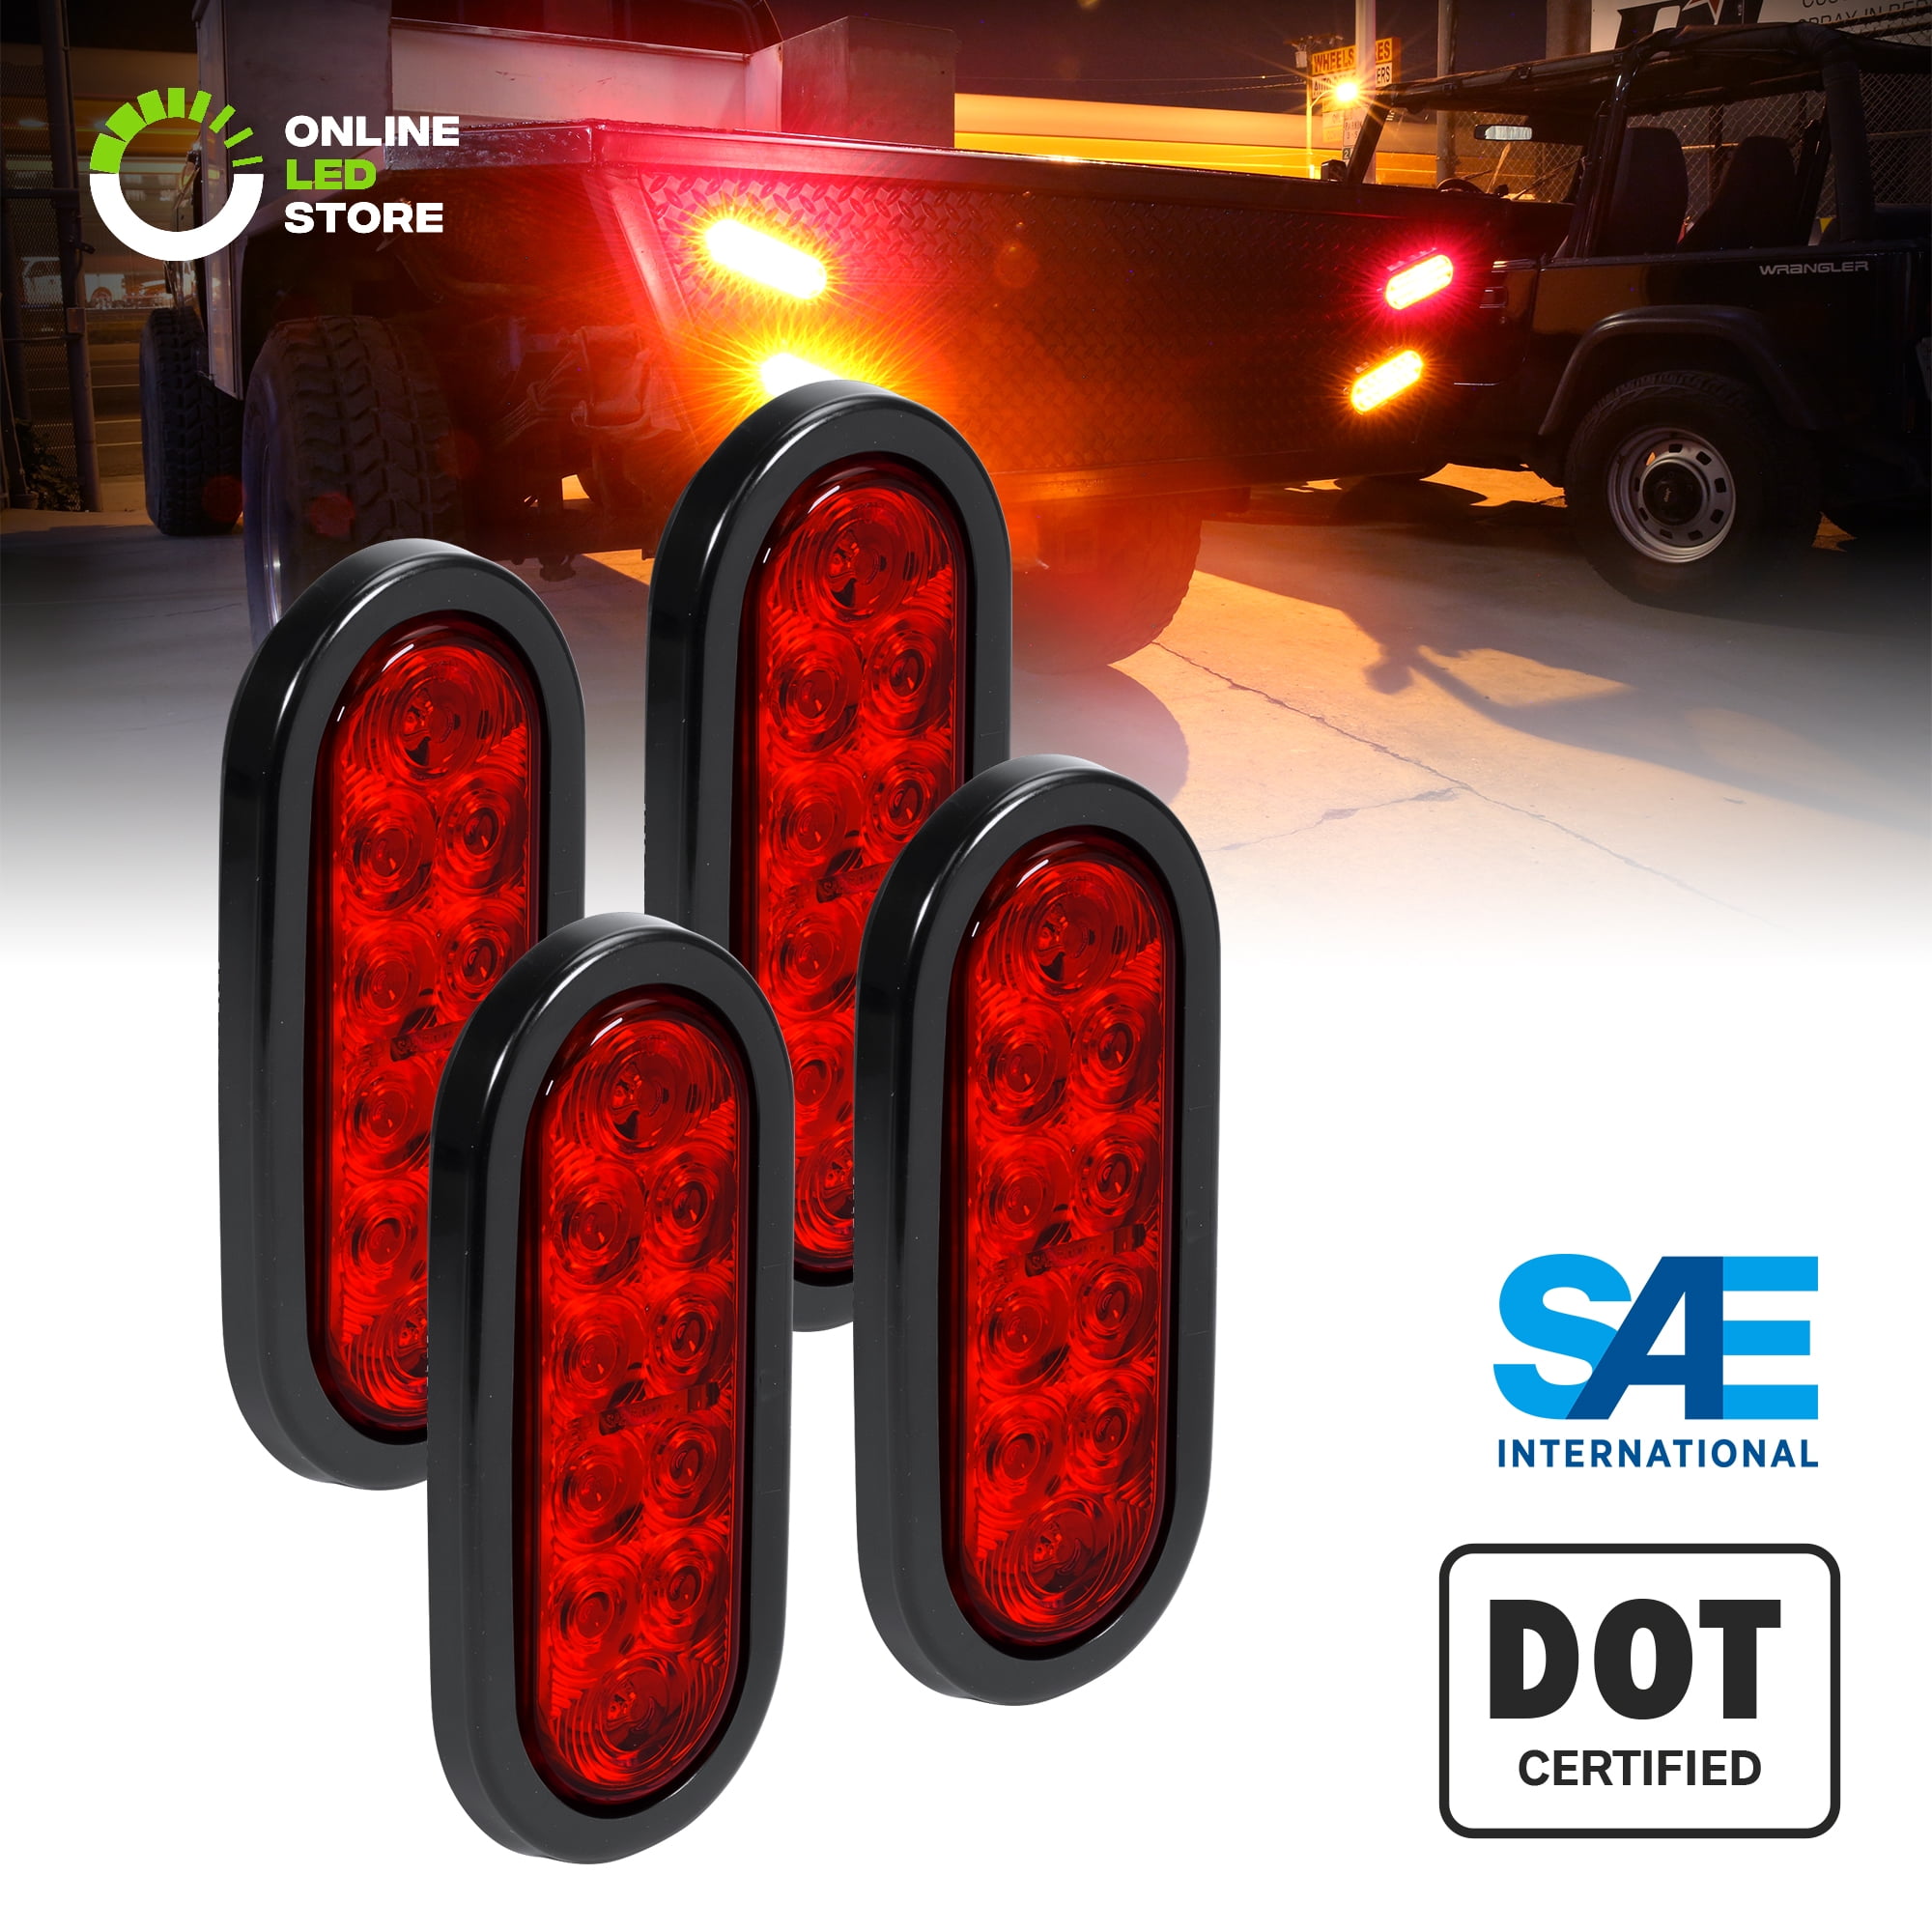 Colored Lens IP67 Waterproof DOT Approved Truck Park Turn Signal Lights 4 Round Amber LED Trailer Tail Light 1 Pack Grommet & Plugs Included RV Jeep Semi Truck Taillight 10 Bright LEDs 